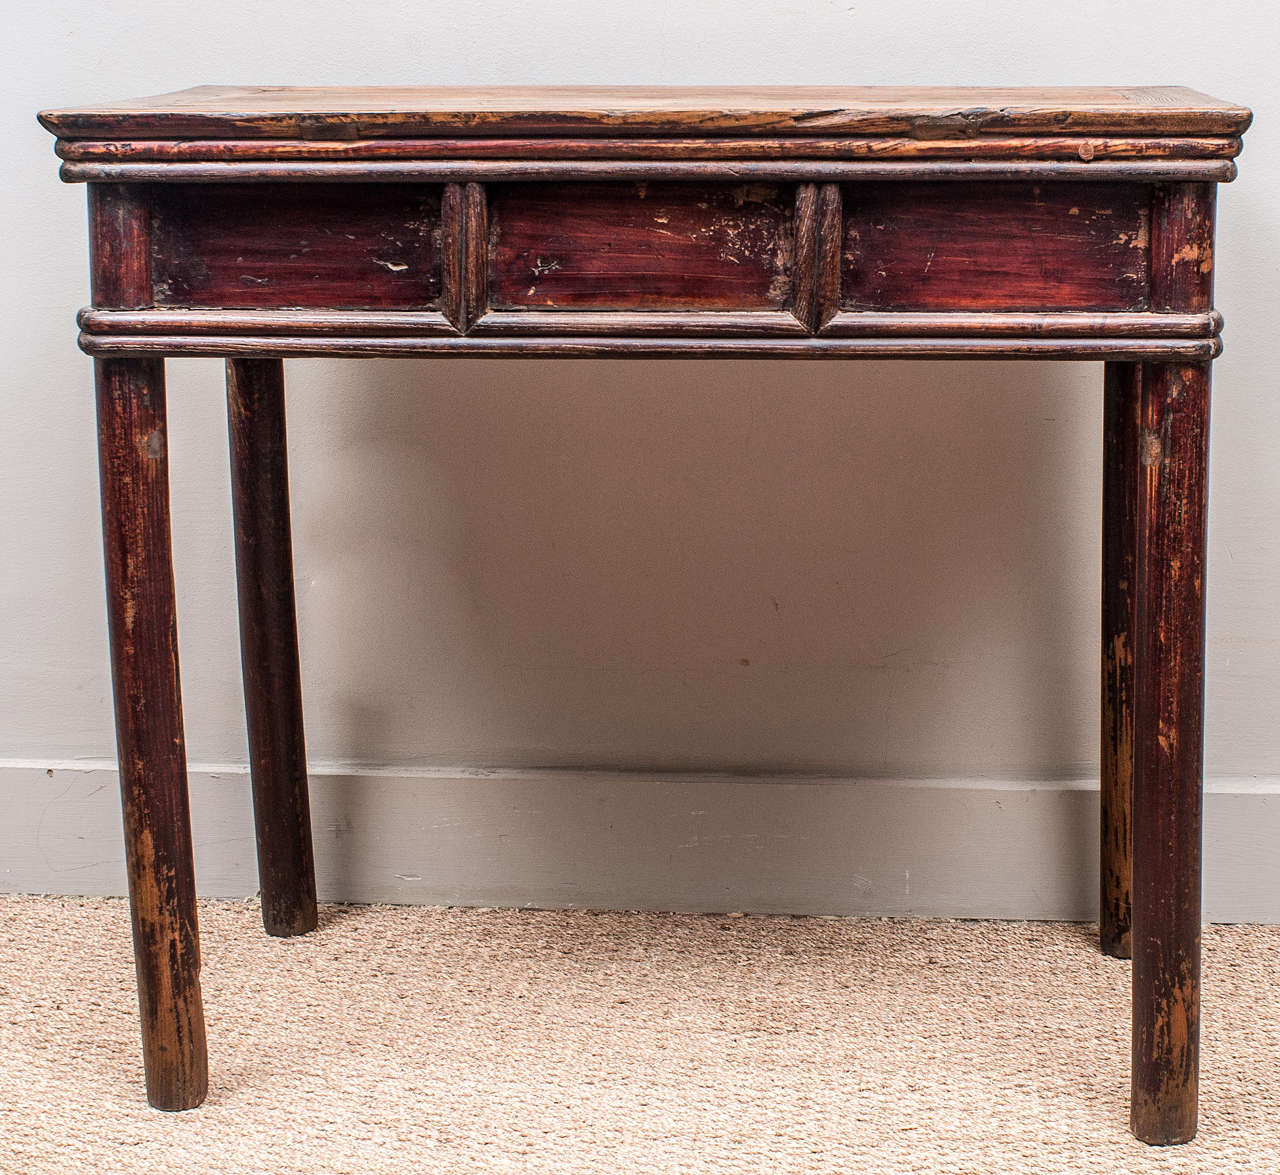 Three-drawer Chinese elmwood desk retains slight remnants of its original red lacquer finish. The top of the writing surface glows with a mellow patina.